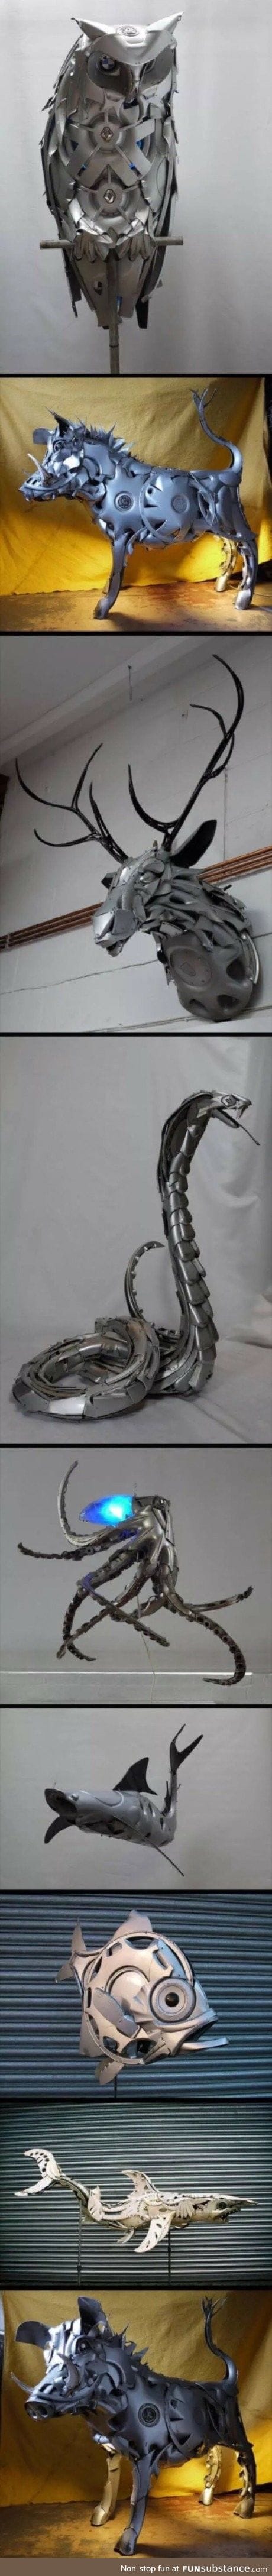 Sculptures made entirely from hubcaps found on the side of the road